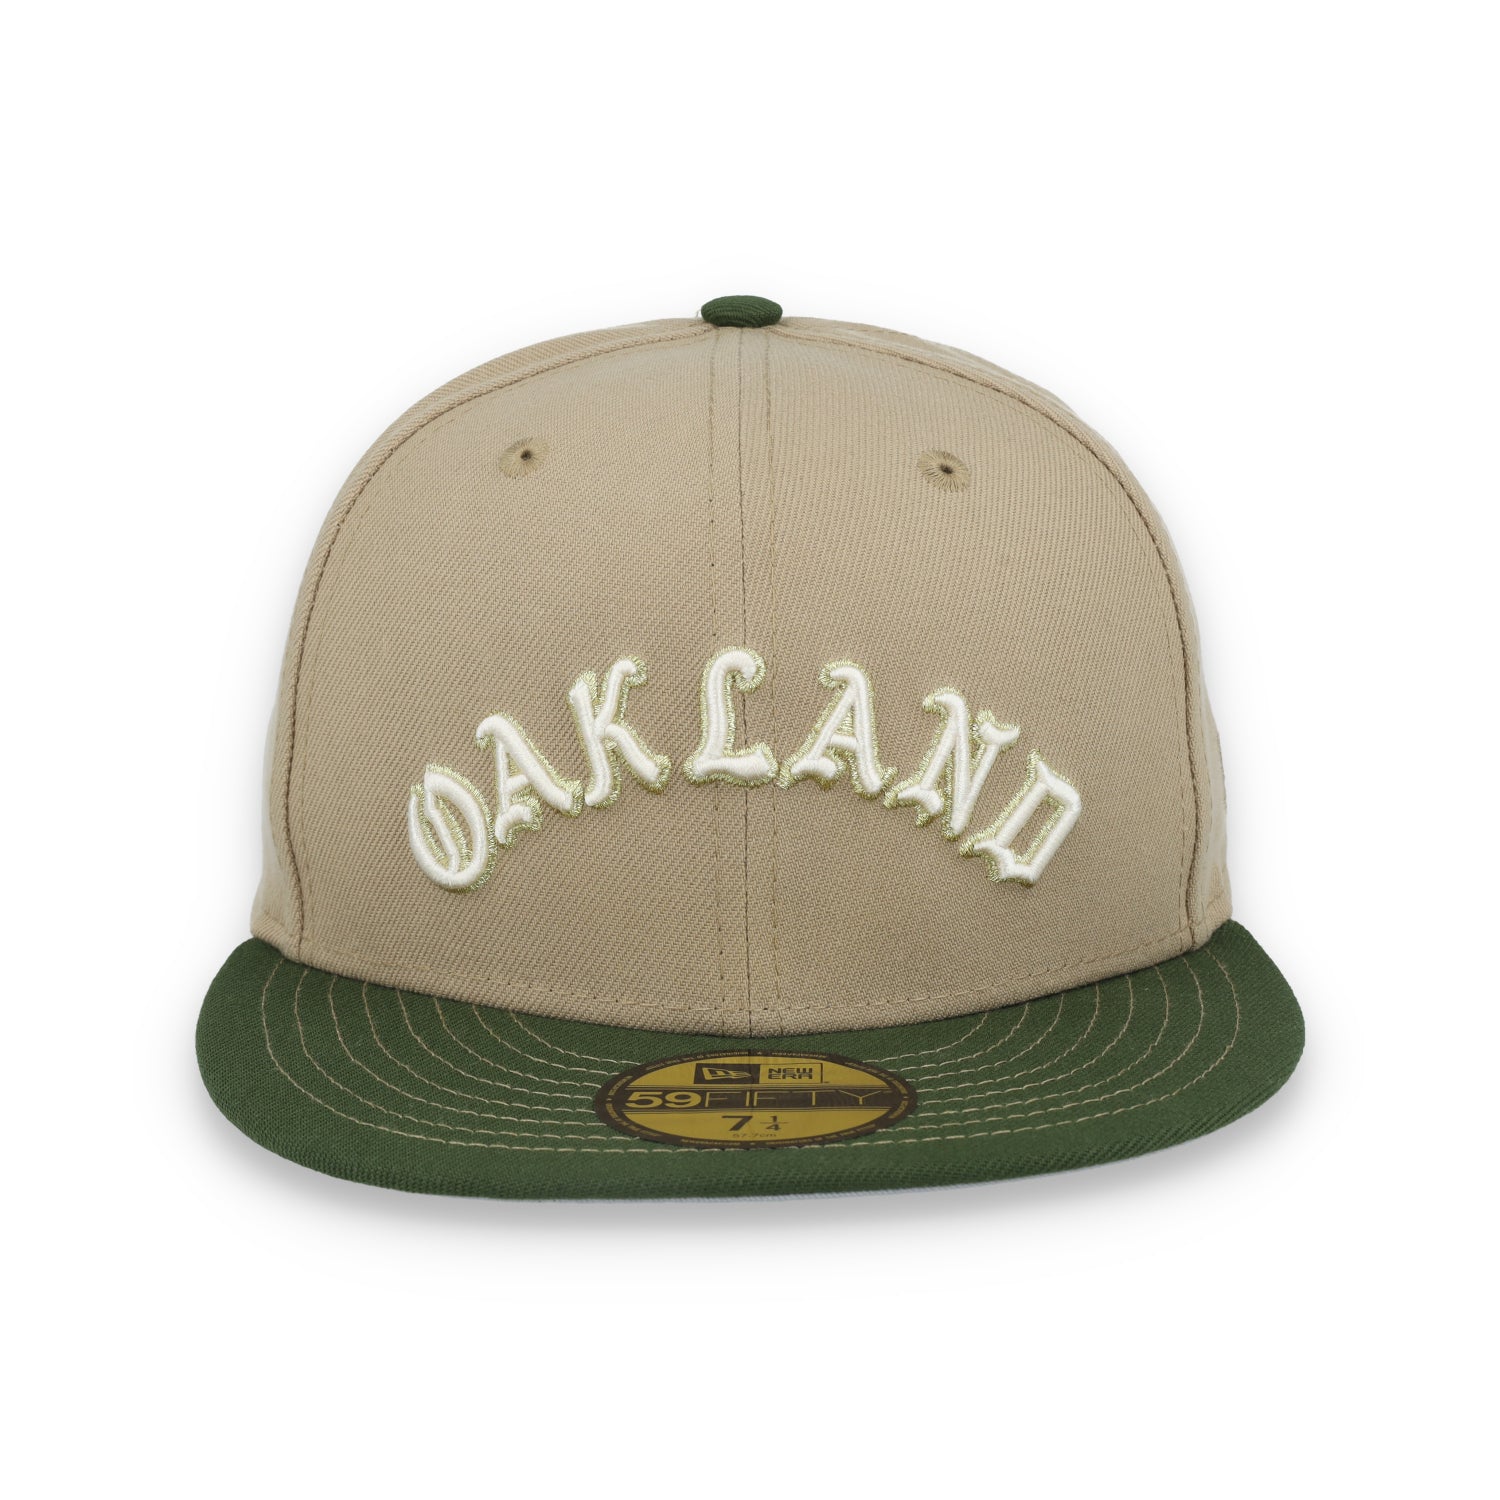 New Era Oakland Athletics 59FIFTY Fitted Hat- Camel